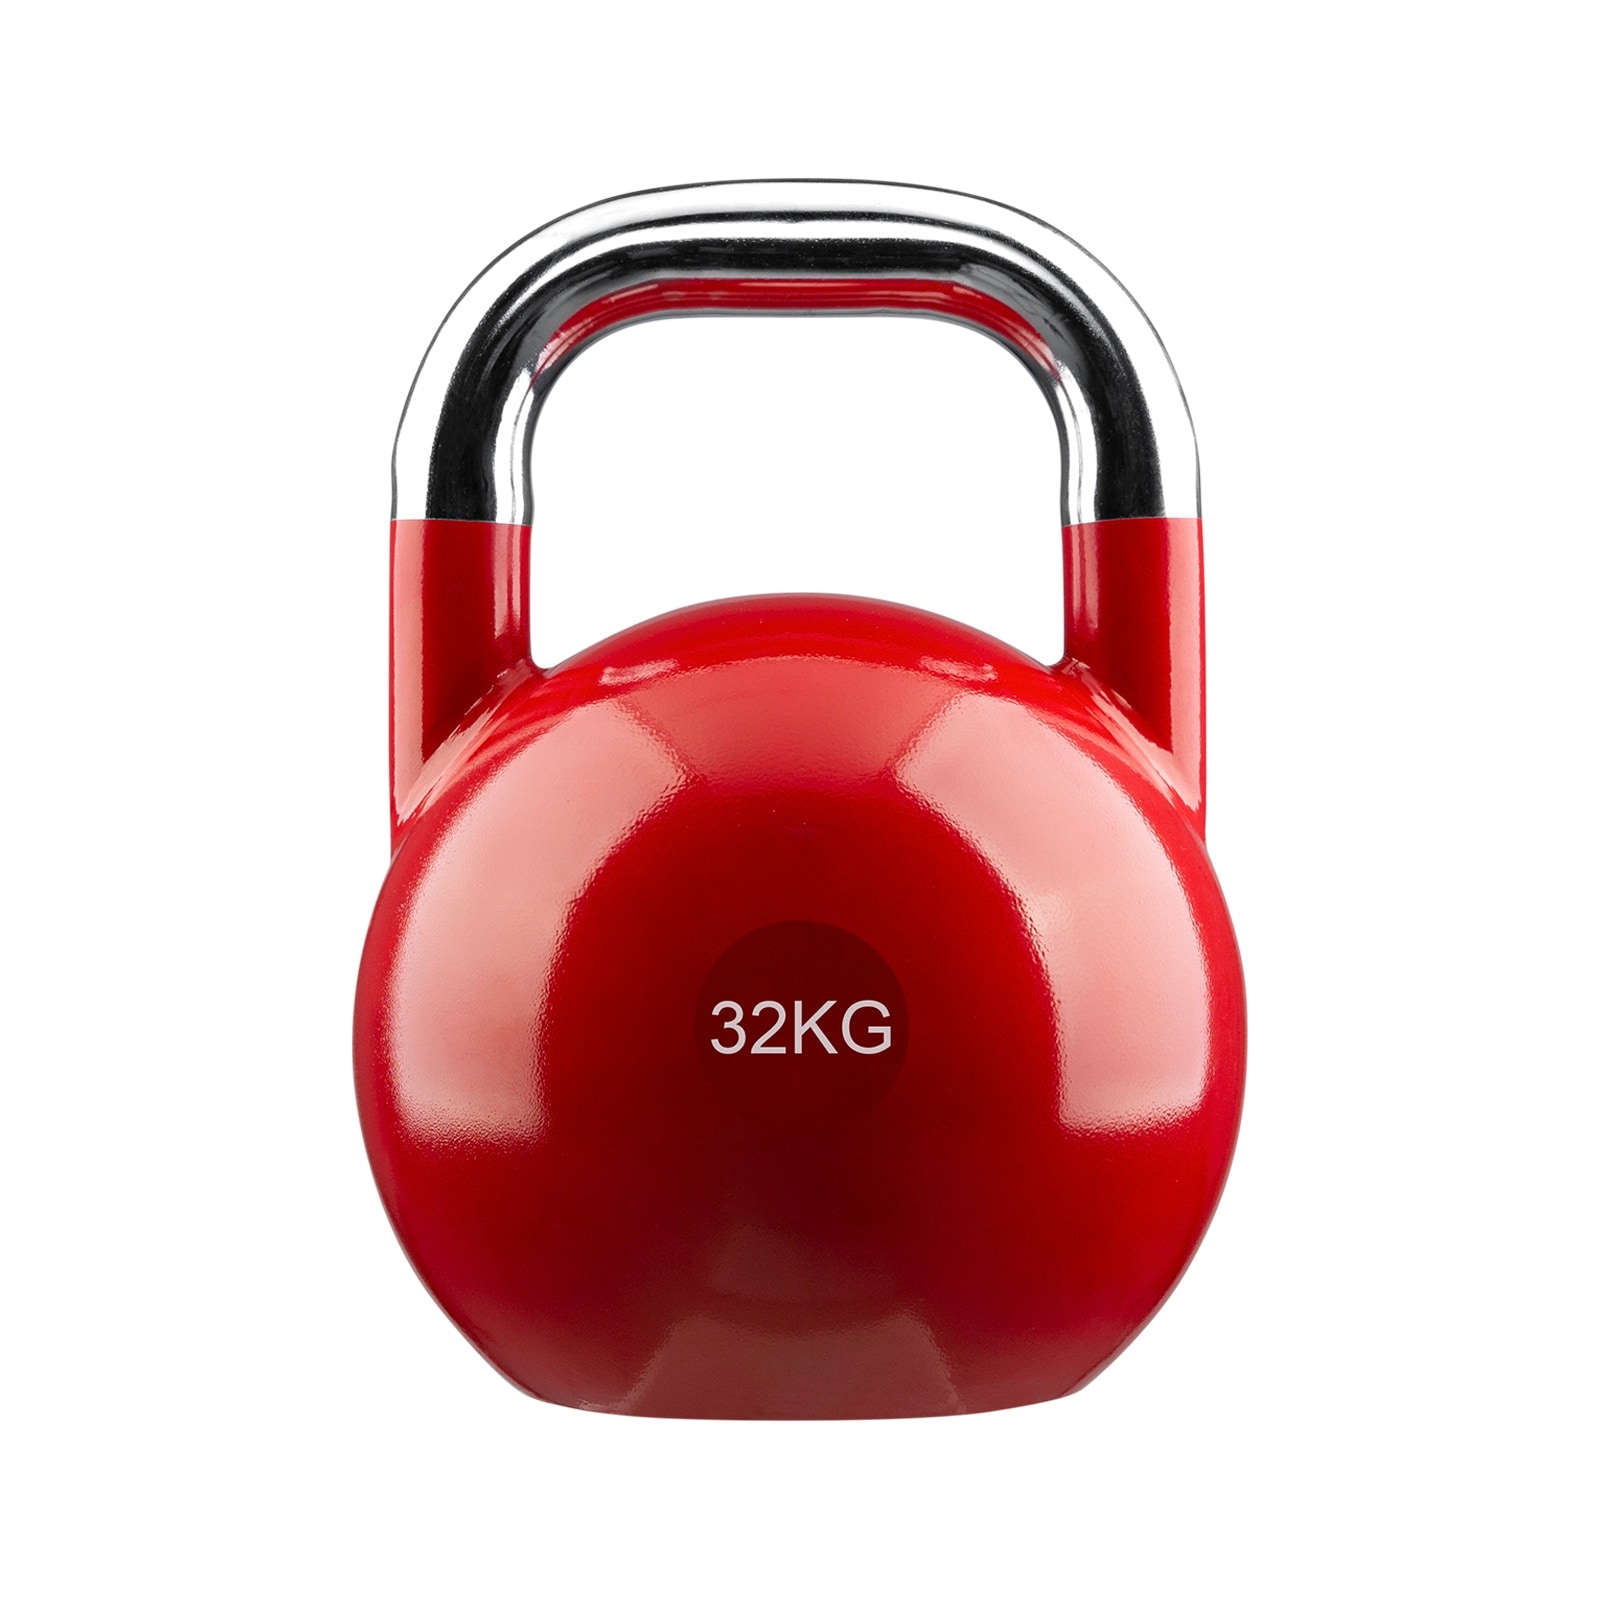 VENTRAY HOME Kettlebell, Competition Kettle Bell for Training, Exercise Fitness Weight Set, 32kg/70.5lbs, Red - 32 - - 37497502